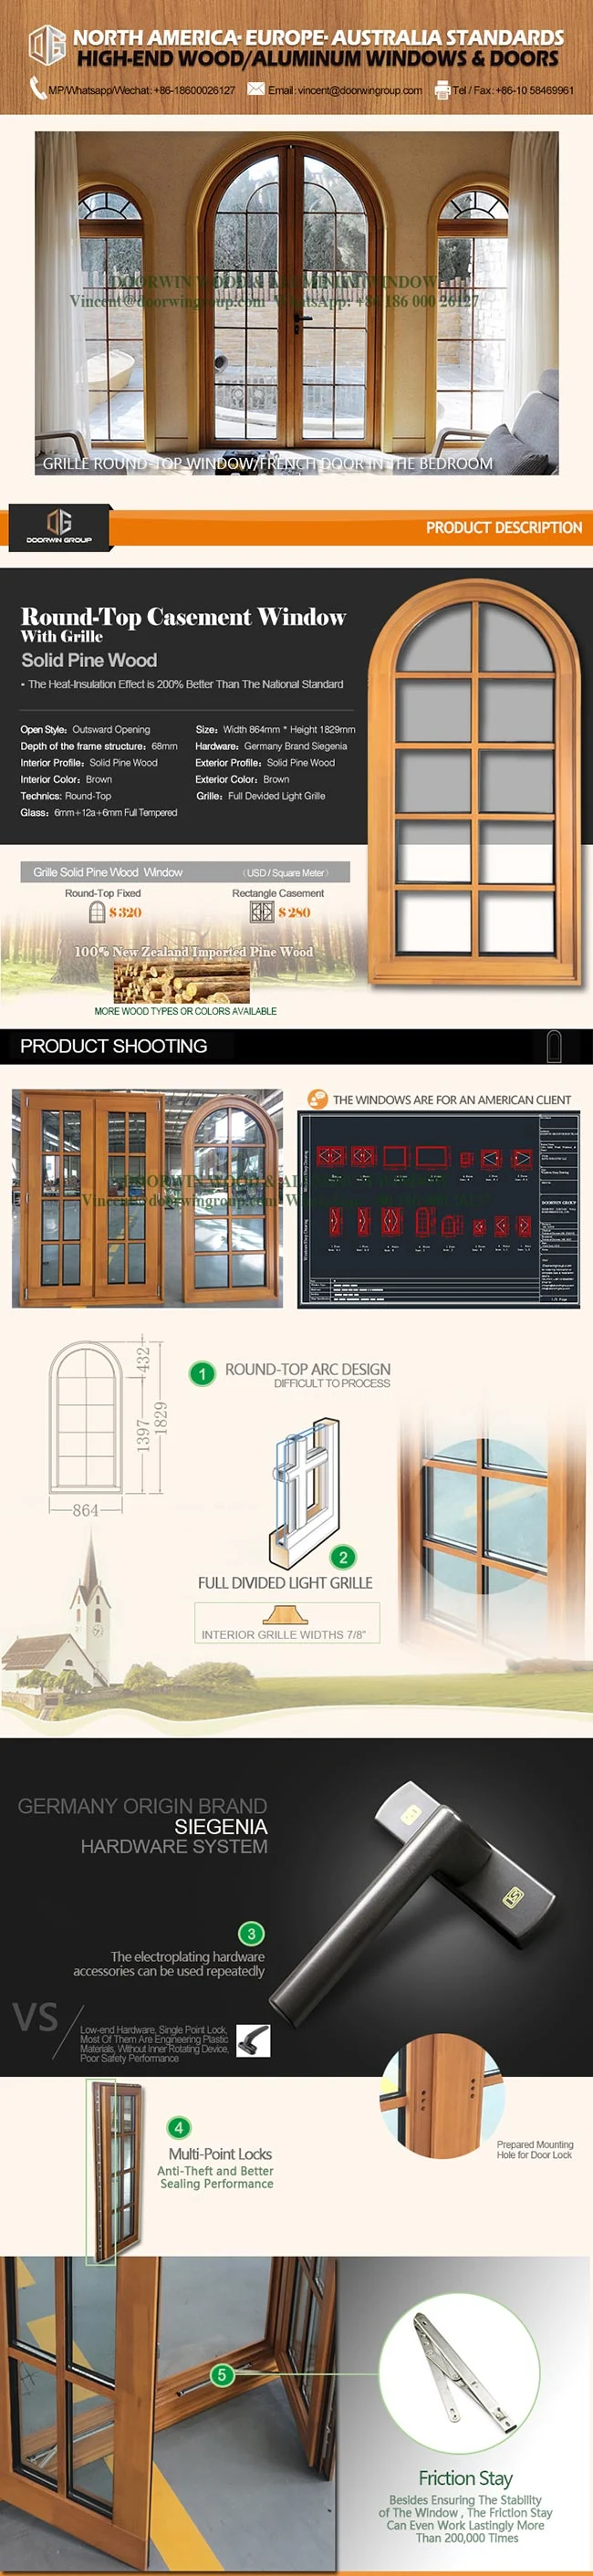 Grille Round-Top Casement Window Solid Pine Wood Larch Wood Window